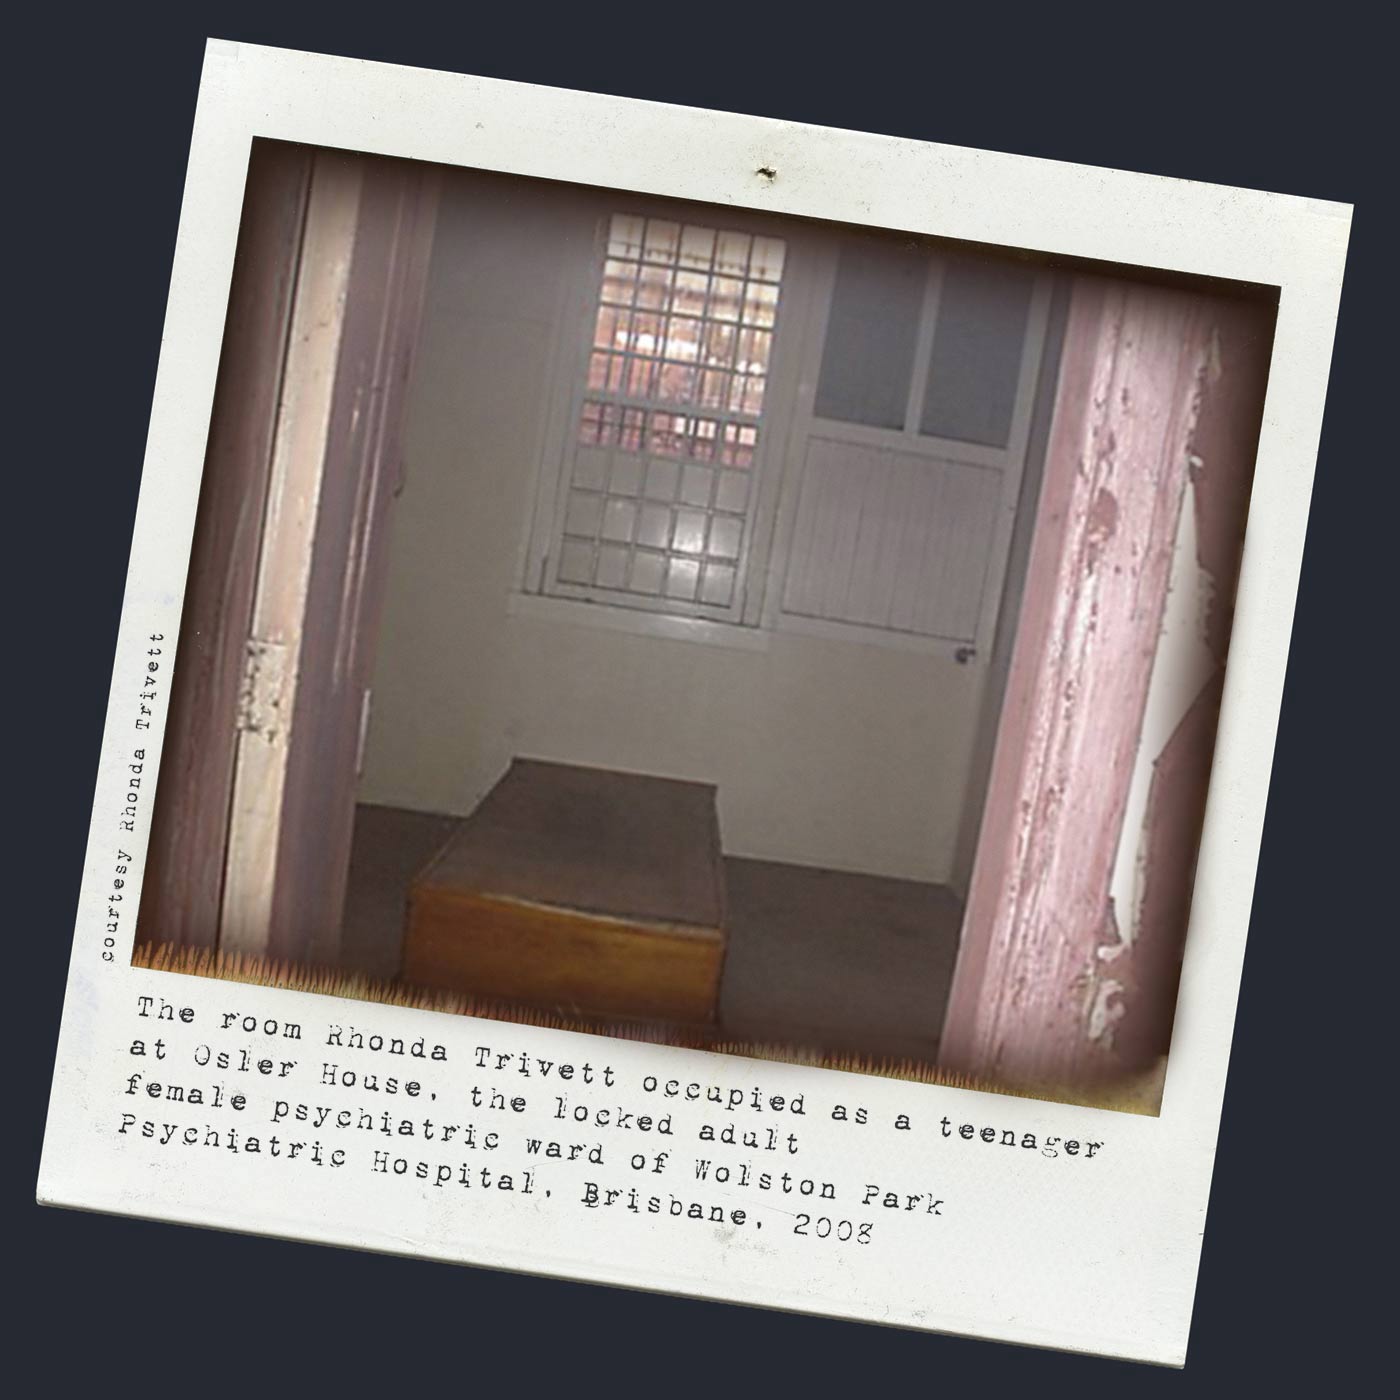 At right is a Polaroid photograph framed by a door, looking through to a low wooden bed base and a barred window. Typed text below reads 'The room Rhonda Trivett occupied as a teenager at Osler House, the locked adult female psychiatric ward of Wolston Park Psychiatric Hospital, Brisbane, 2008'. - click to view larger image